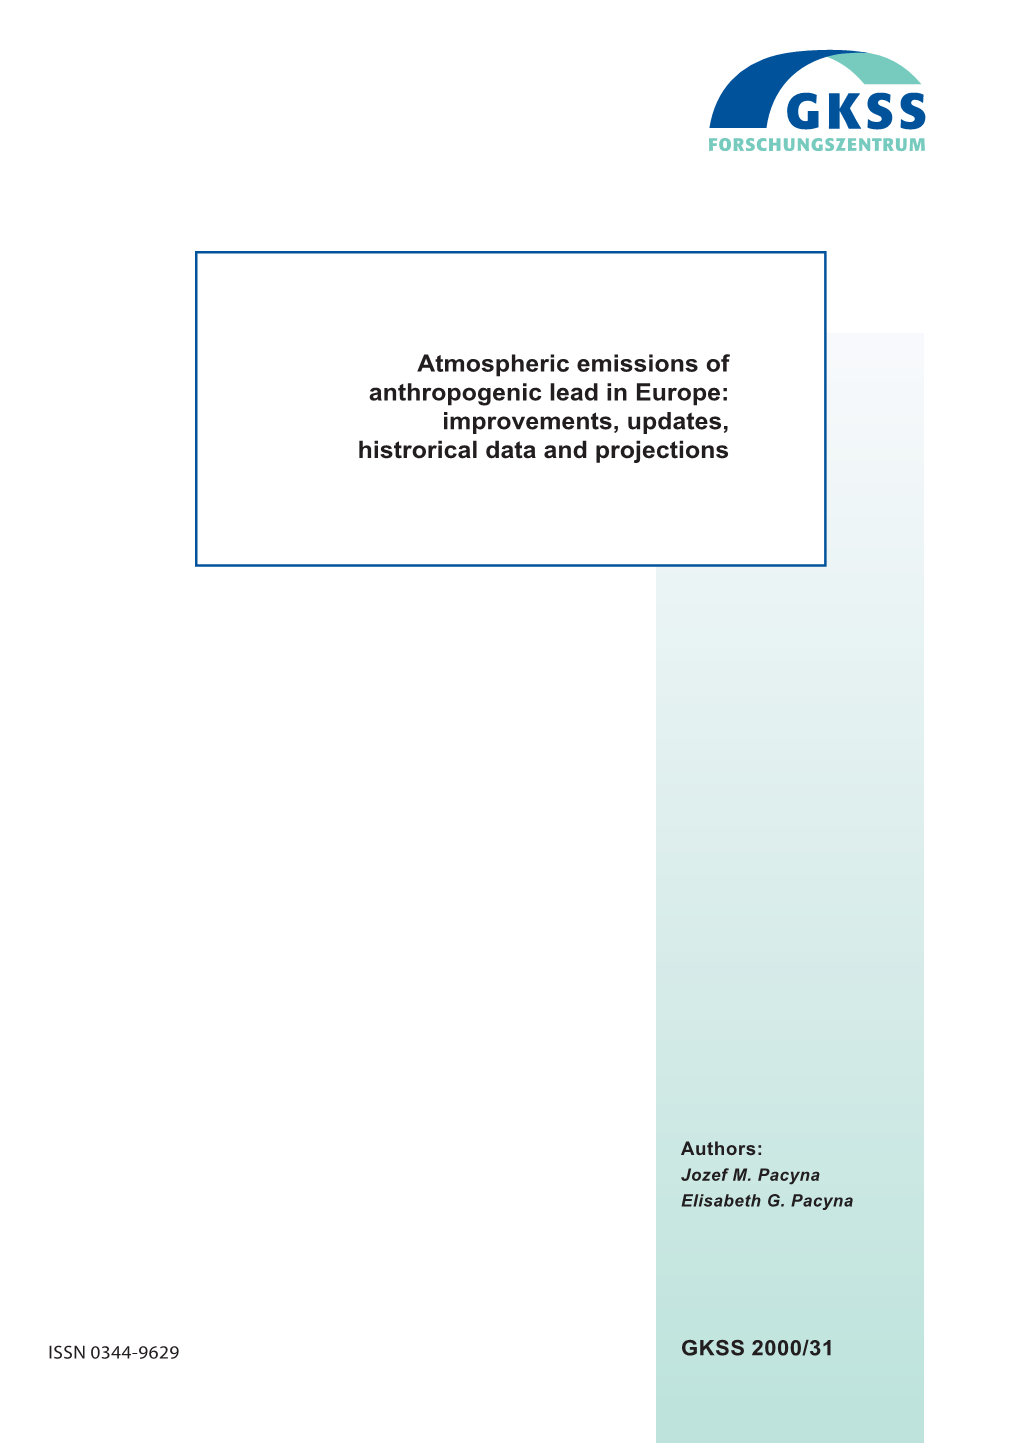 Atmospheric Emissions of Anthropogenic Lead in Europe: Improvements, Updates, Histrorical Data and Projections